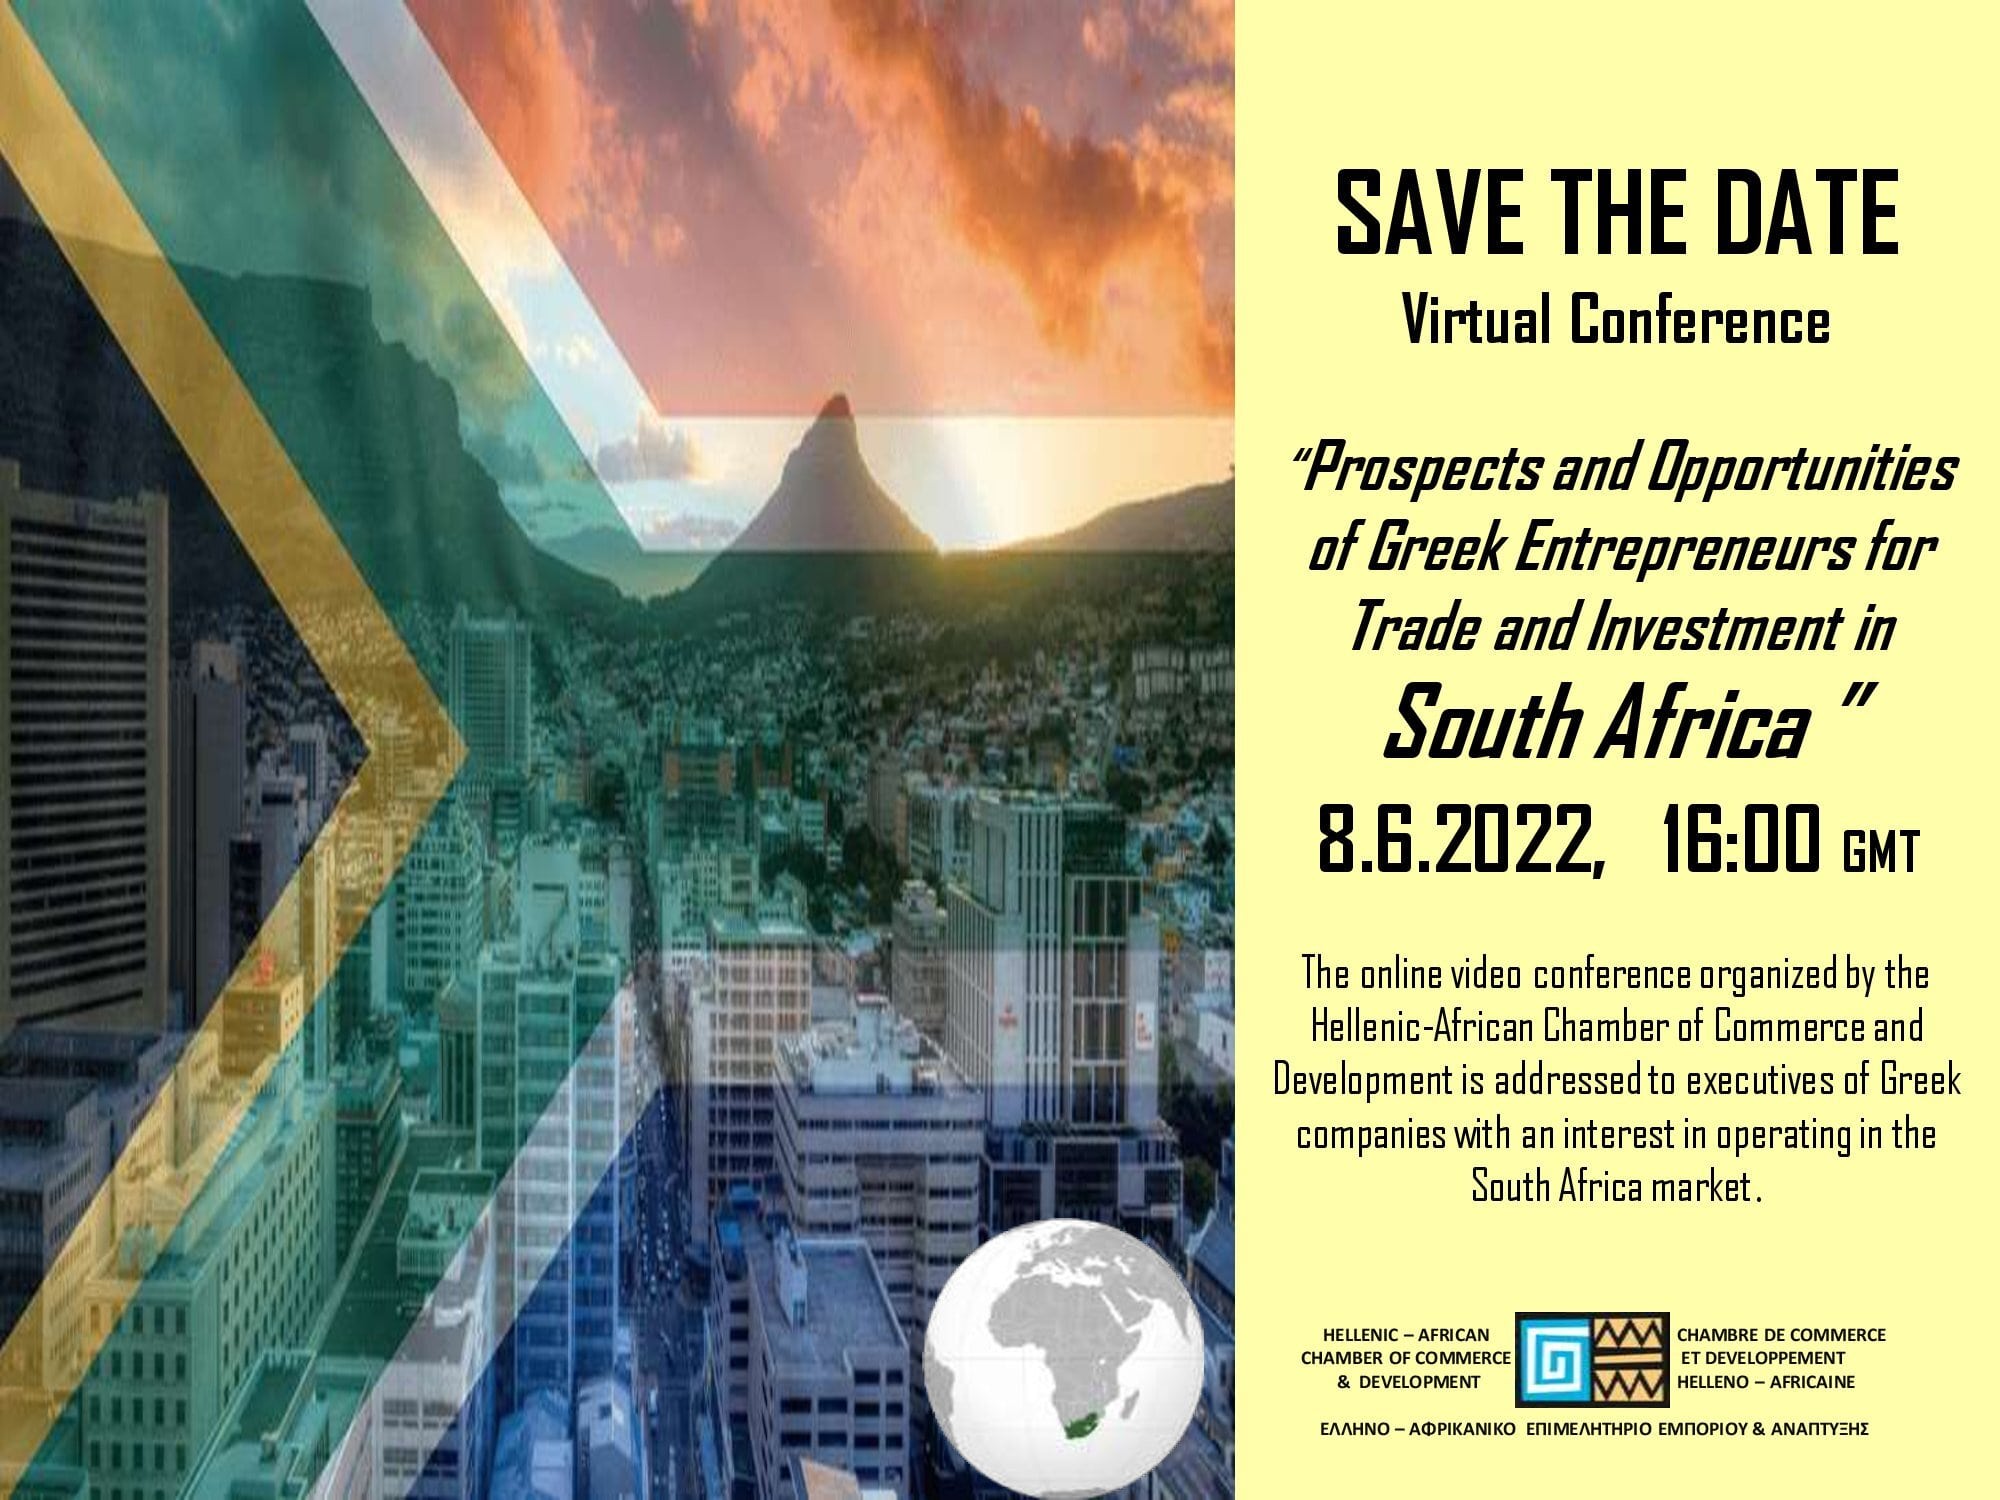 Save the Date : Prospects and Opportunities of Greek Entrepreneurs for Trade and Investment in S. Africa